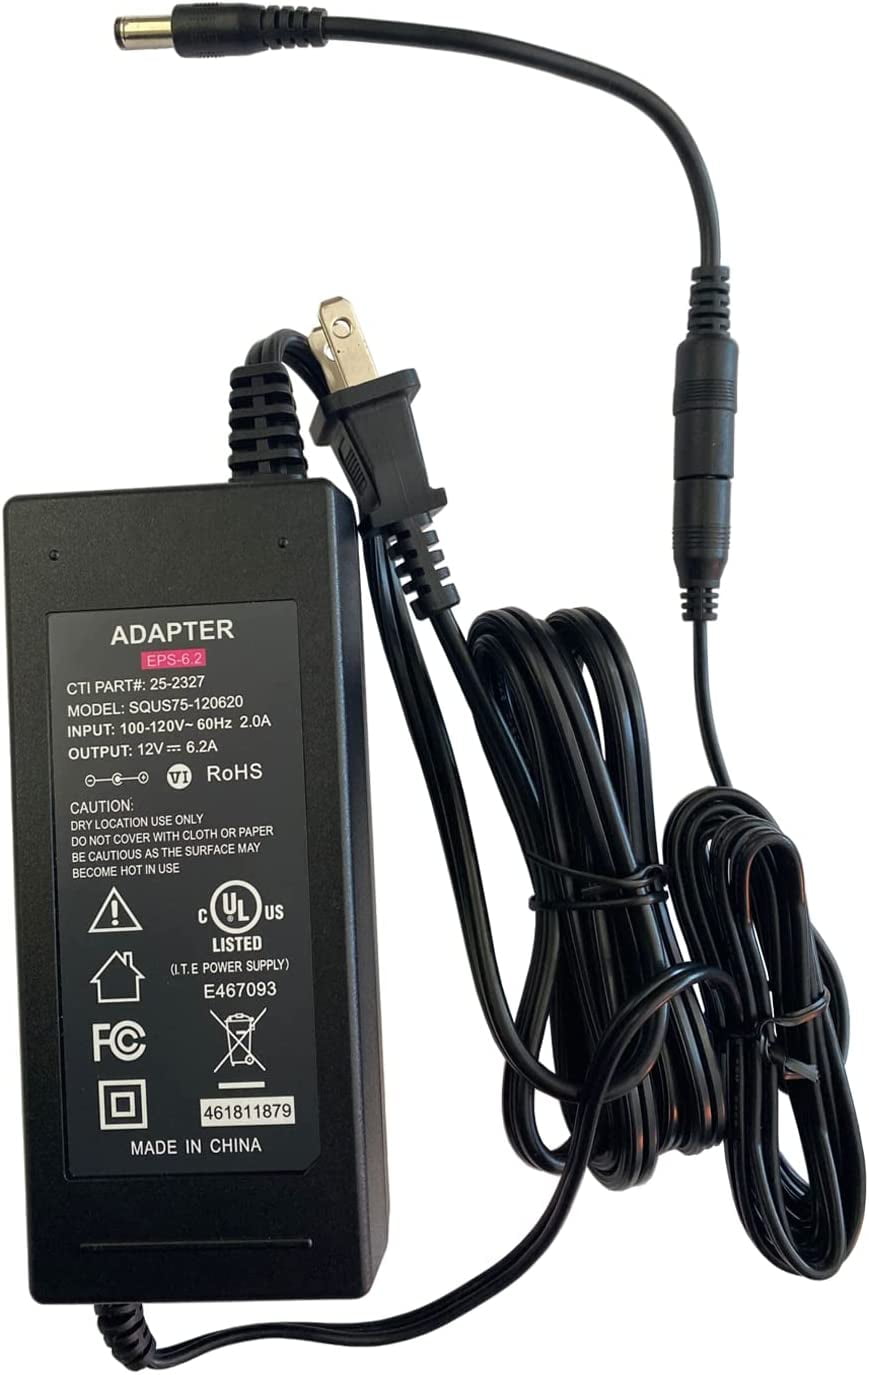 pindas uitlaat omzeilen UpBright 12V UL AC/DC Adapter Compatible with Delta Electronics Inc. Model  DPS-65VB LPS DPS65VB QNAP DC12V 5.417A 65W 12VDC 5417mA 65.0W 12.0V 12 V  Switching Power Supply Cord Cable Charger Mains PSU -